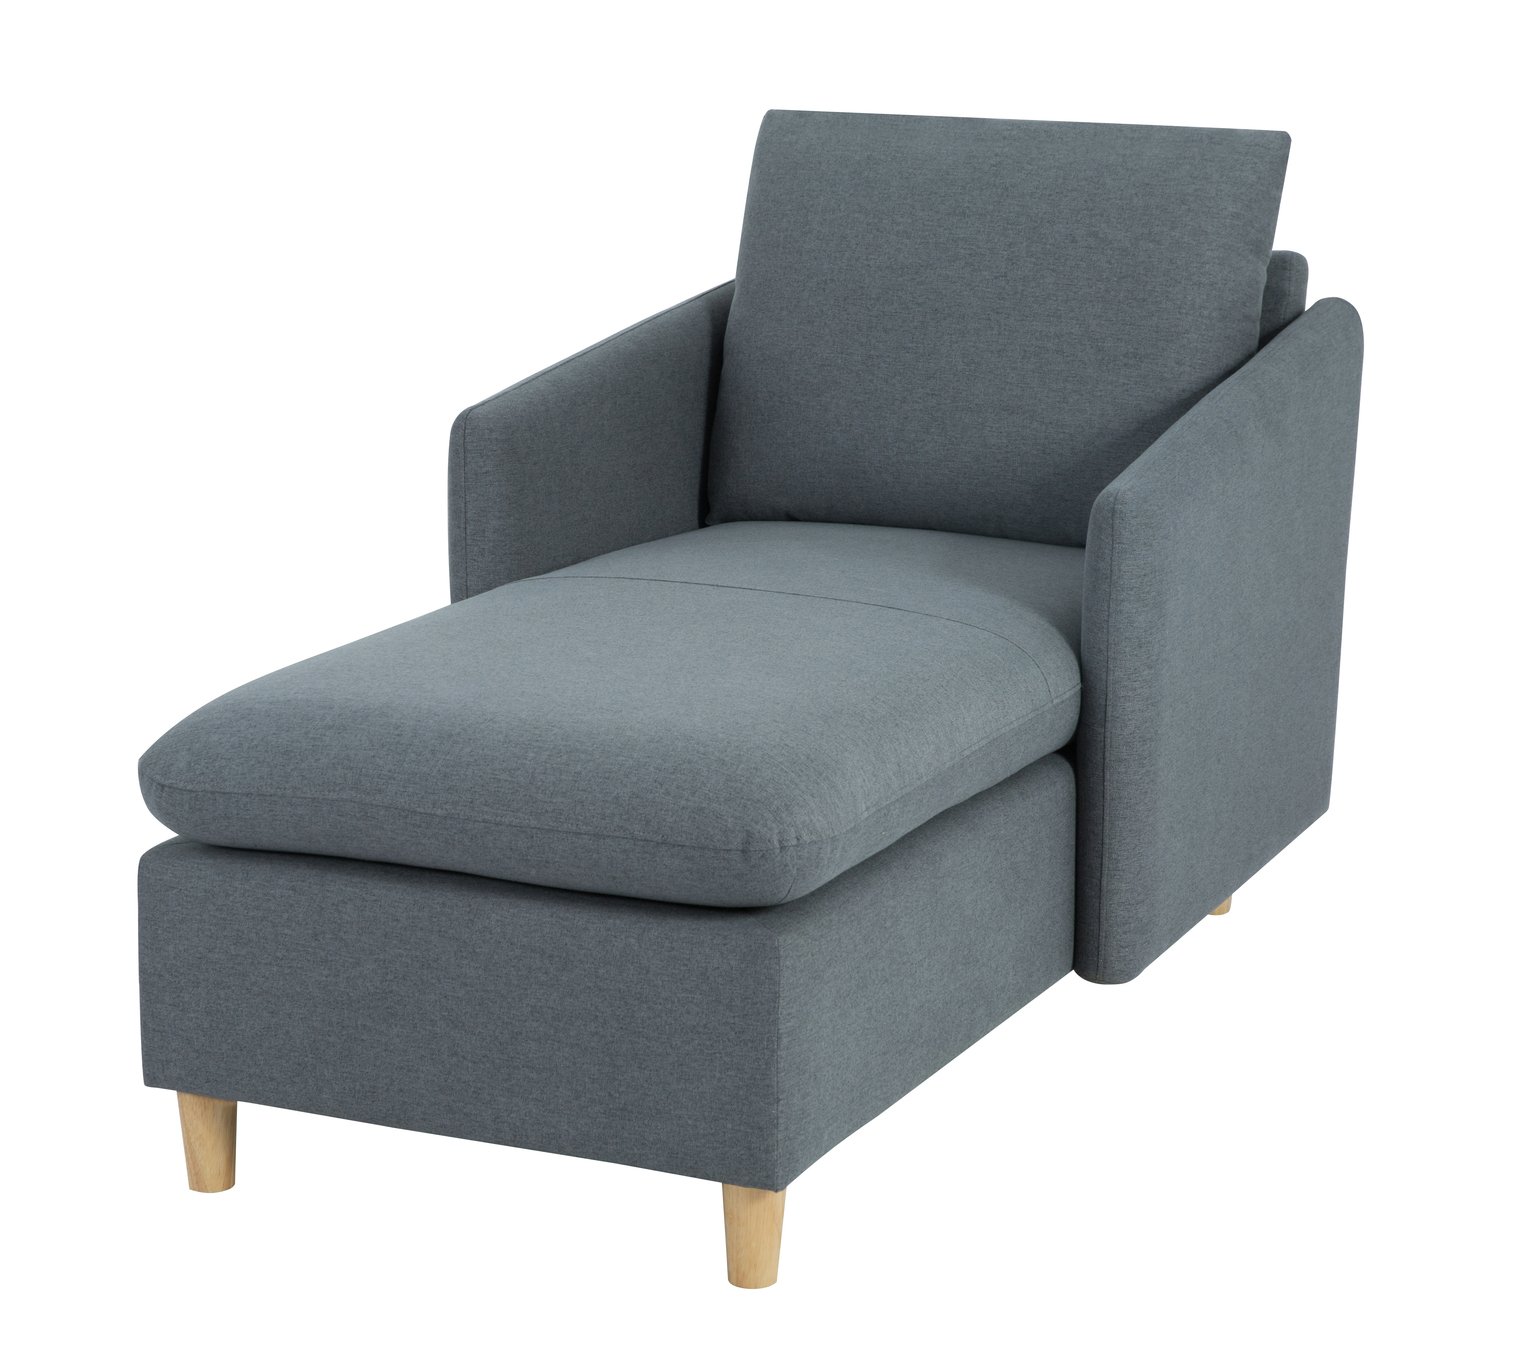 Habitat Mod Fabric Chaise Sofa with Arms Review